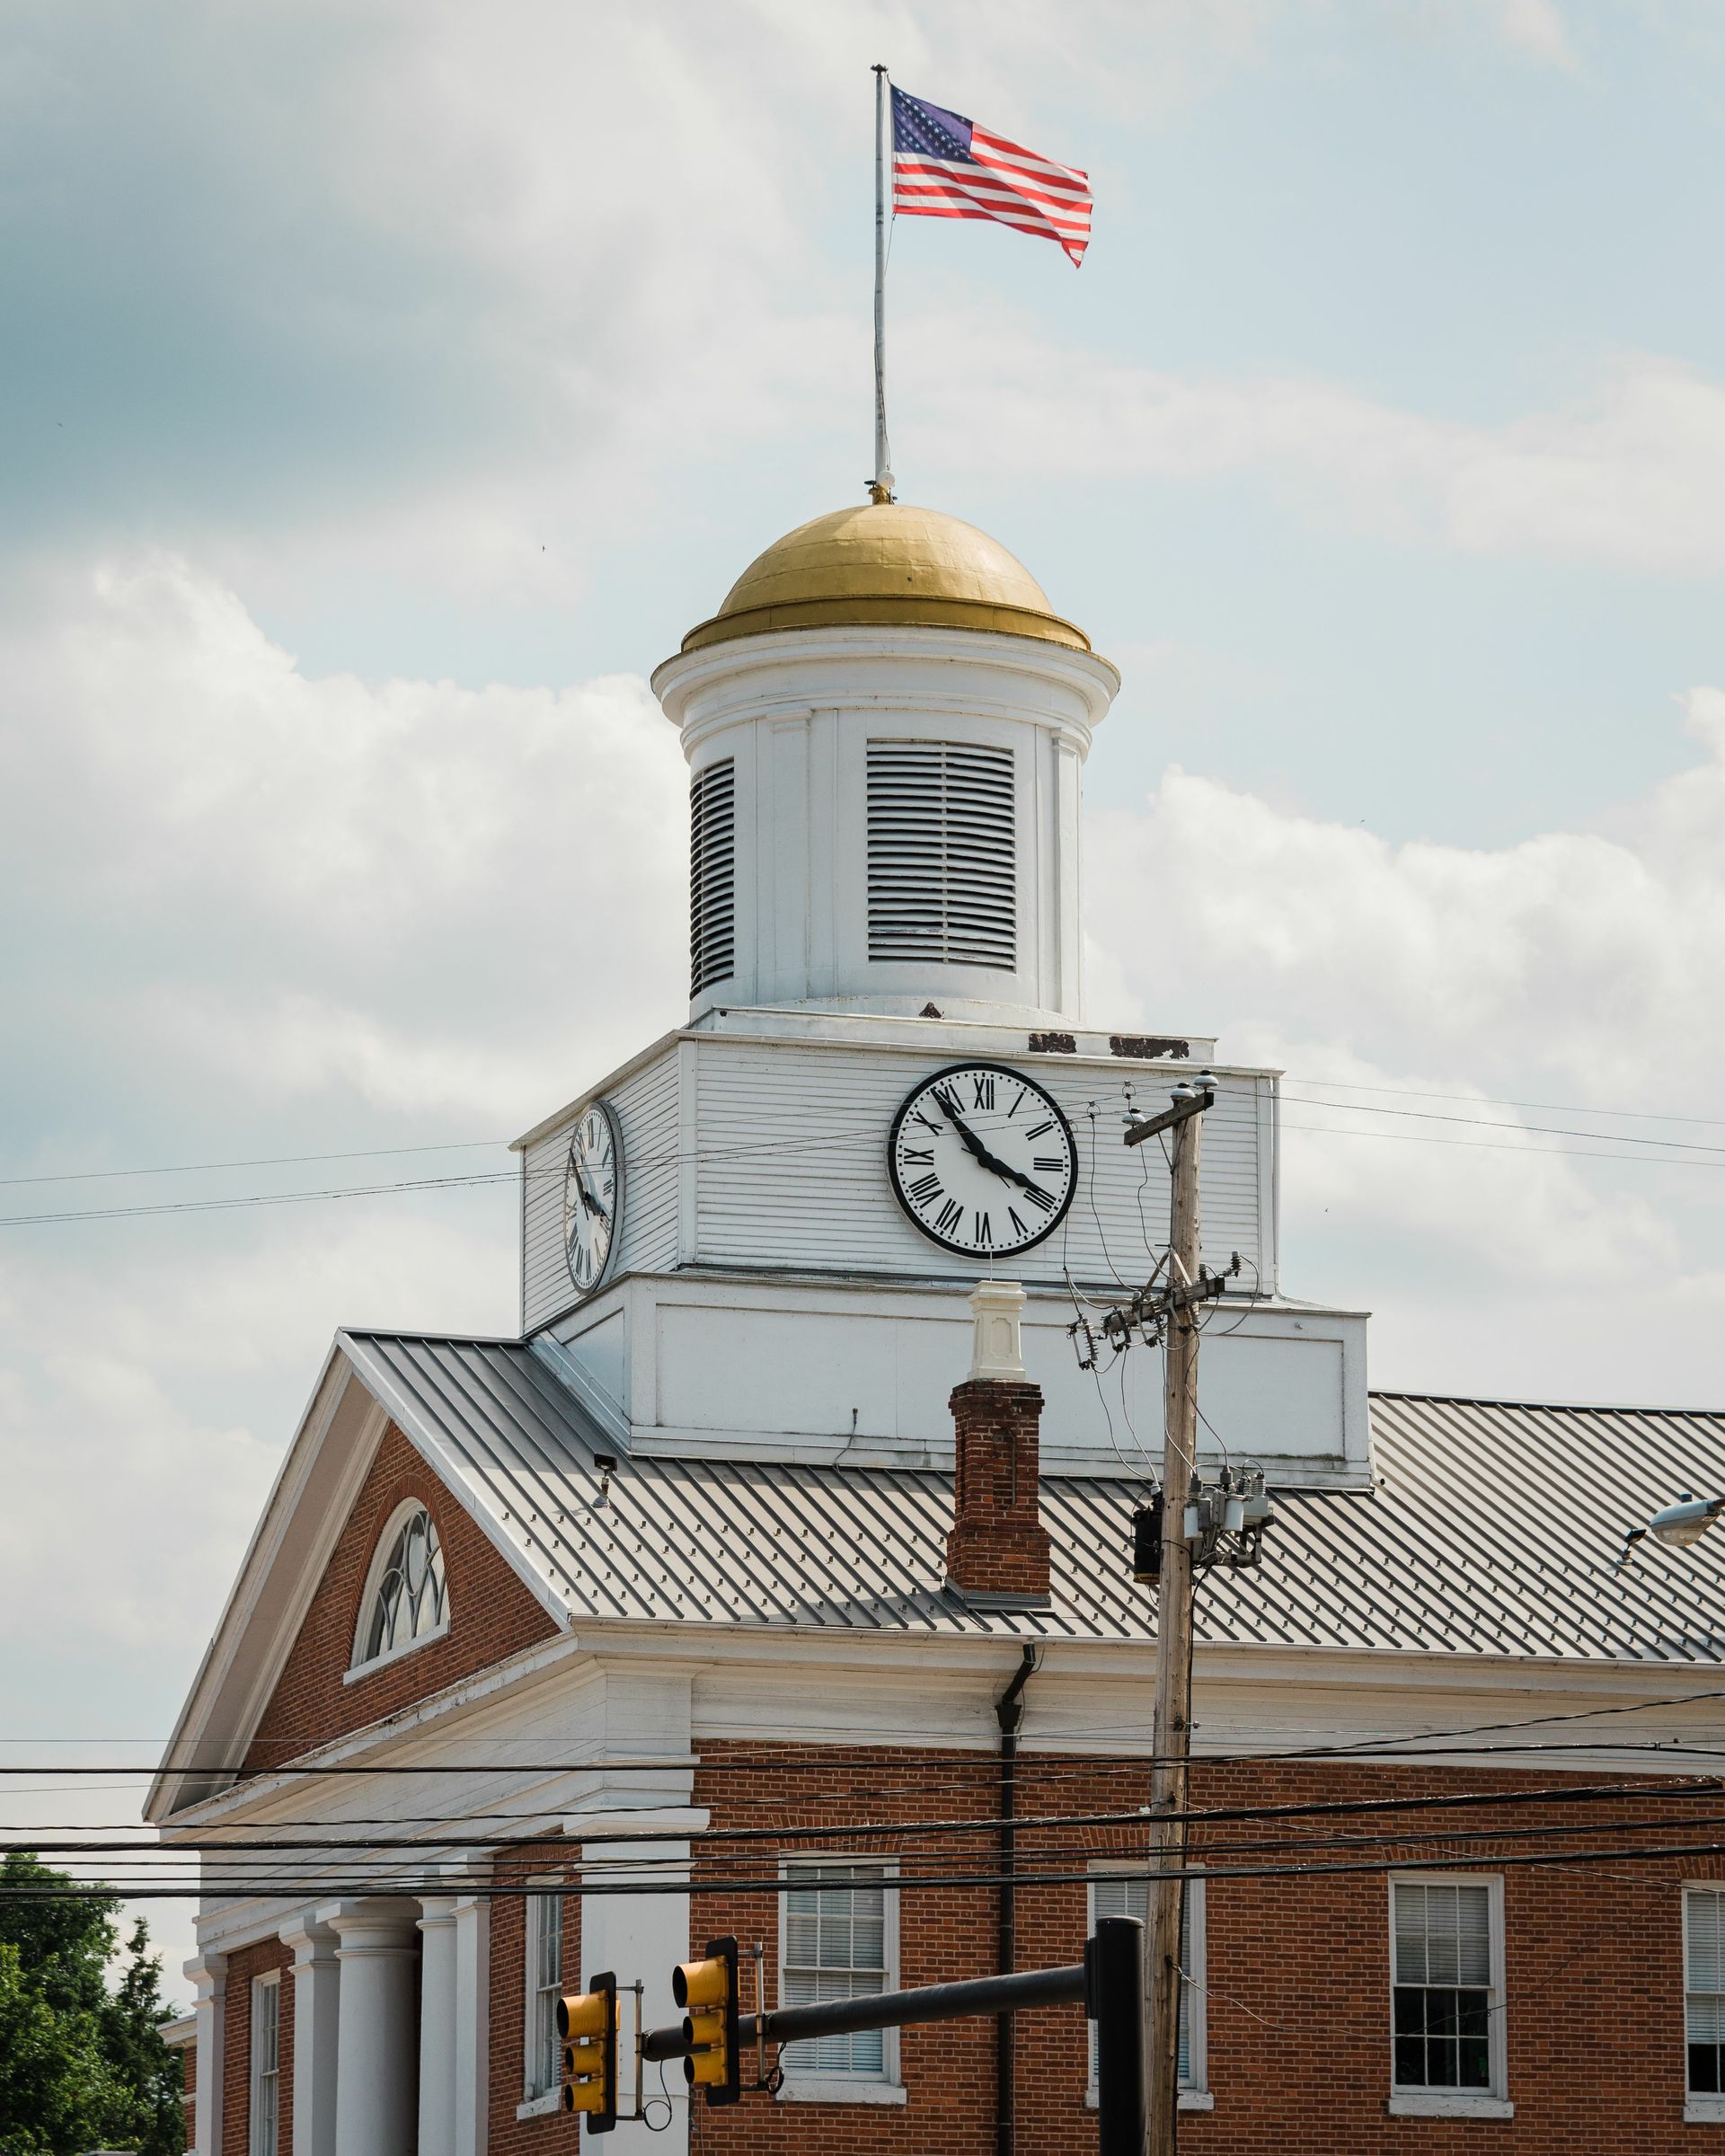 A clock tower with an american flag on top of it